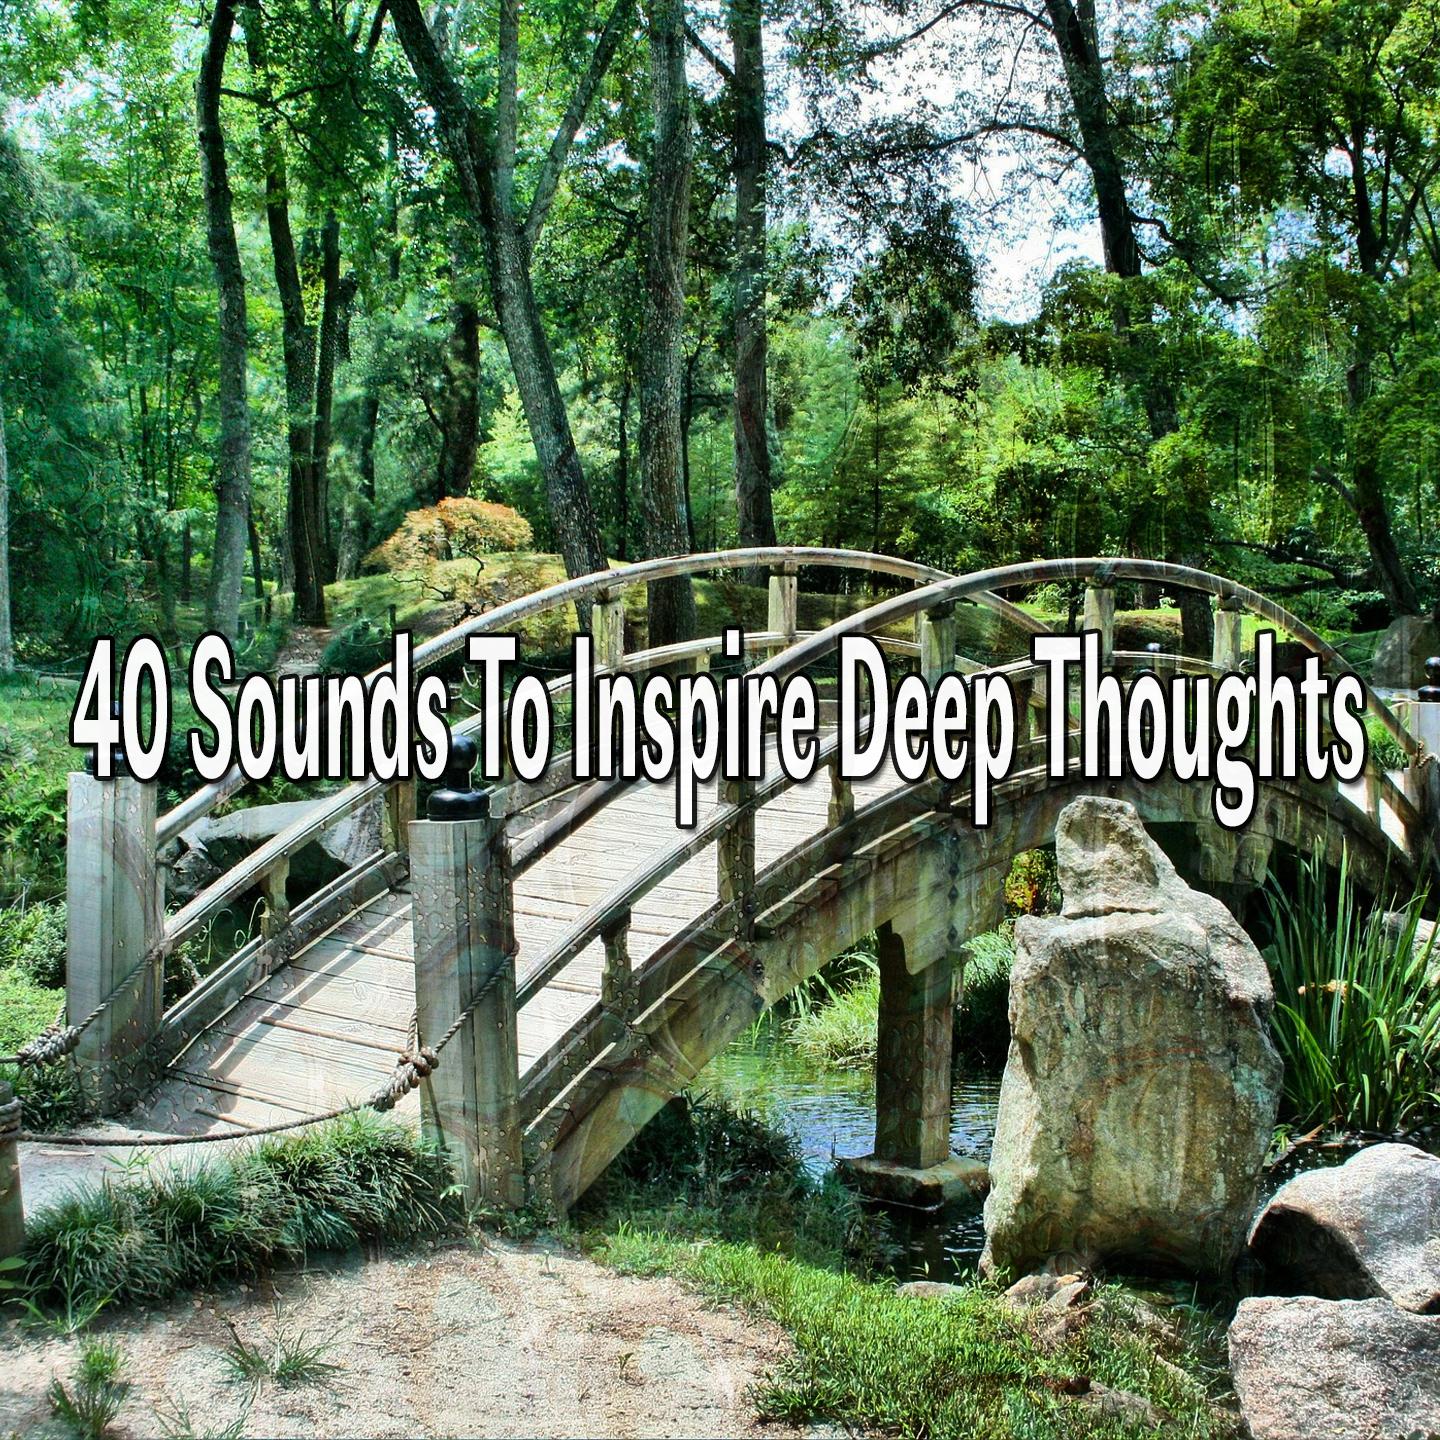 40 Sounds to Inspire Deep Thoughts